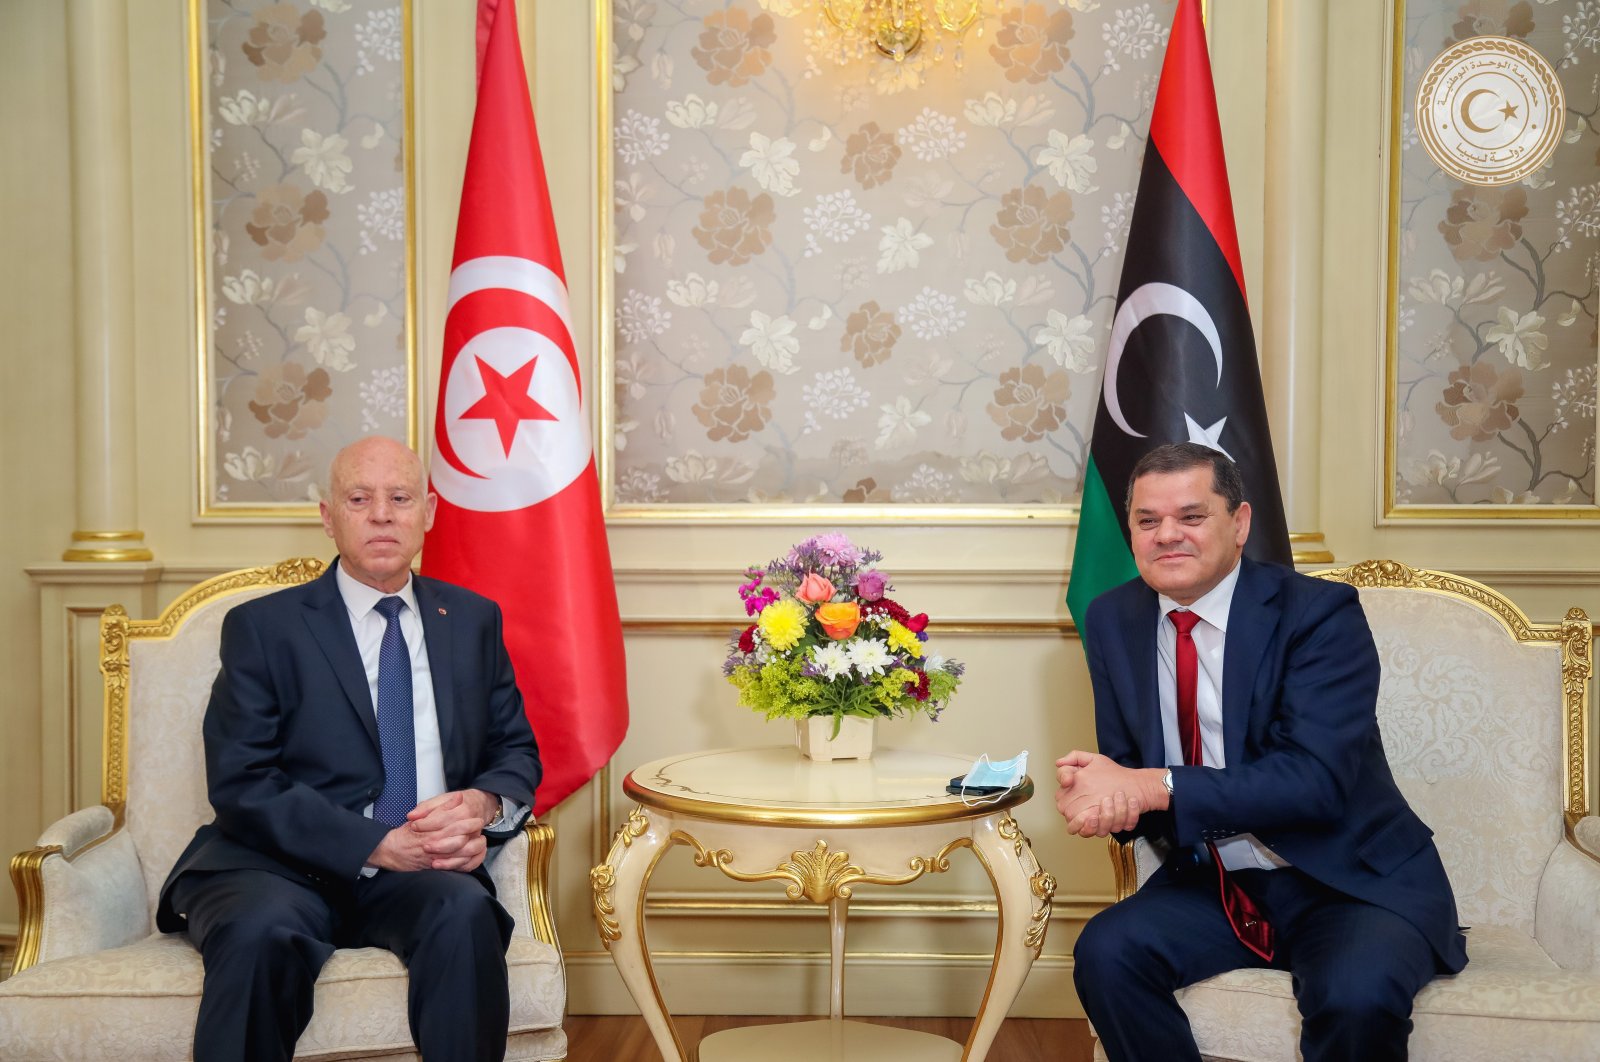 Tunisia's President Kais Saied meets with Libya's Prime Minister Abdulhamid Dbeibeh in Tripoli, Libya March 17, 2021. (Media Office of the Prime Minister via Reuters)